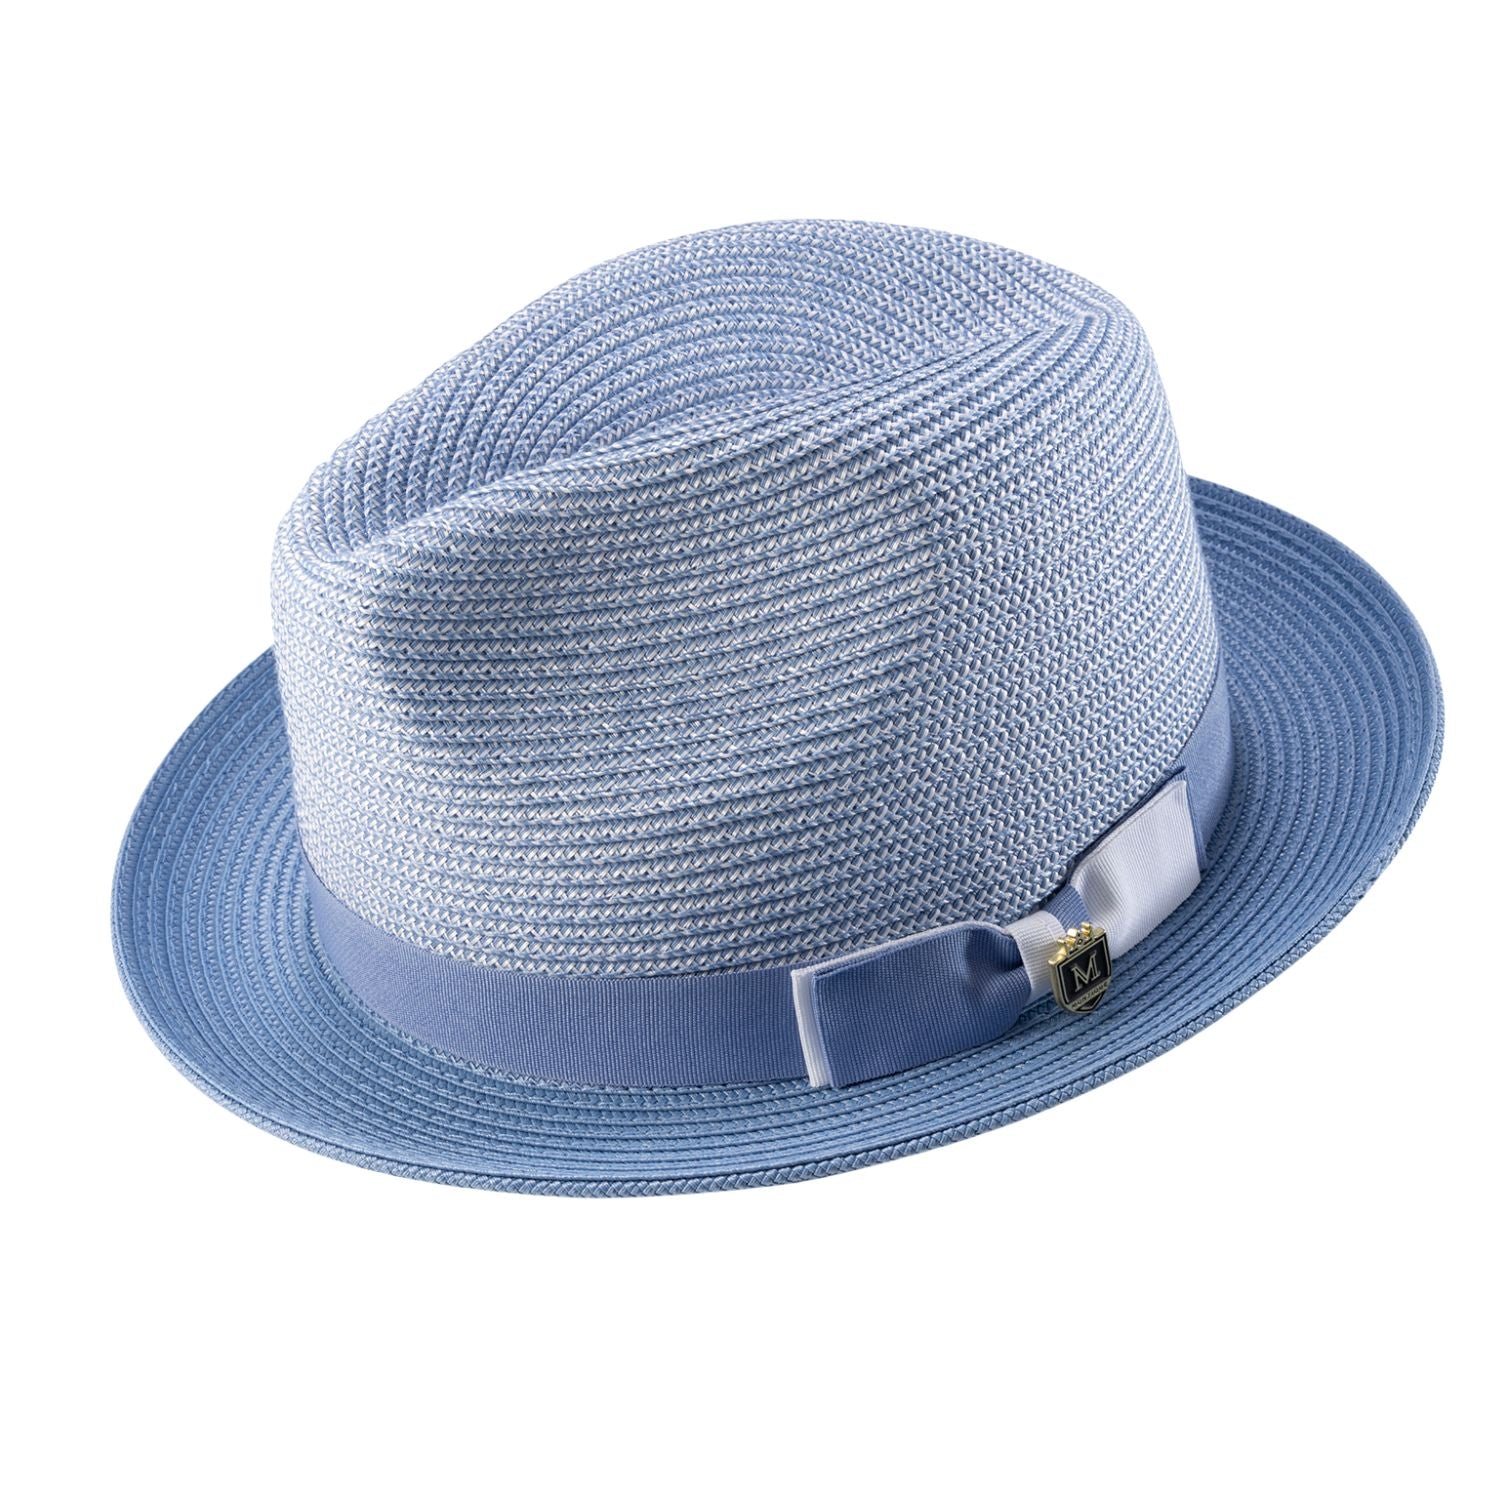 Rubique Collection: Men's Braided Two Tone Stingy Brim Pinch